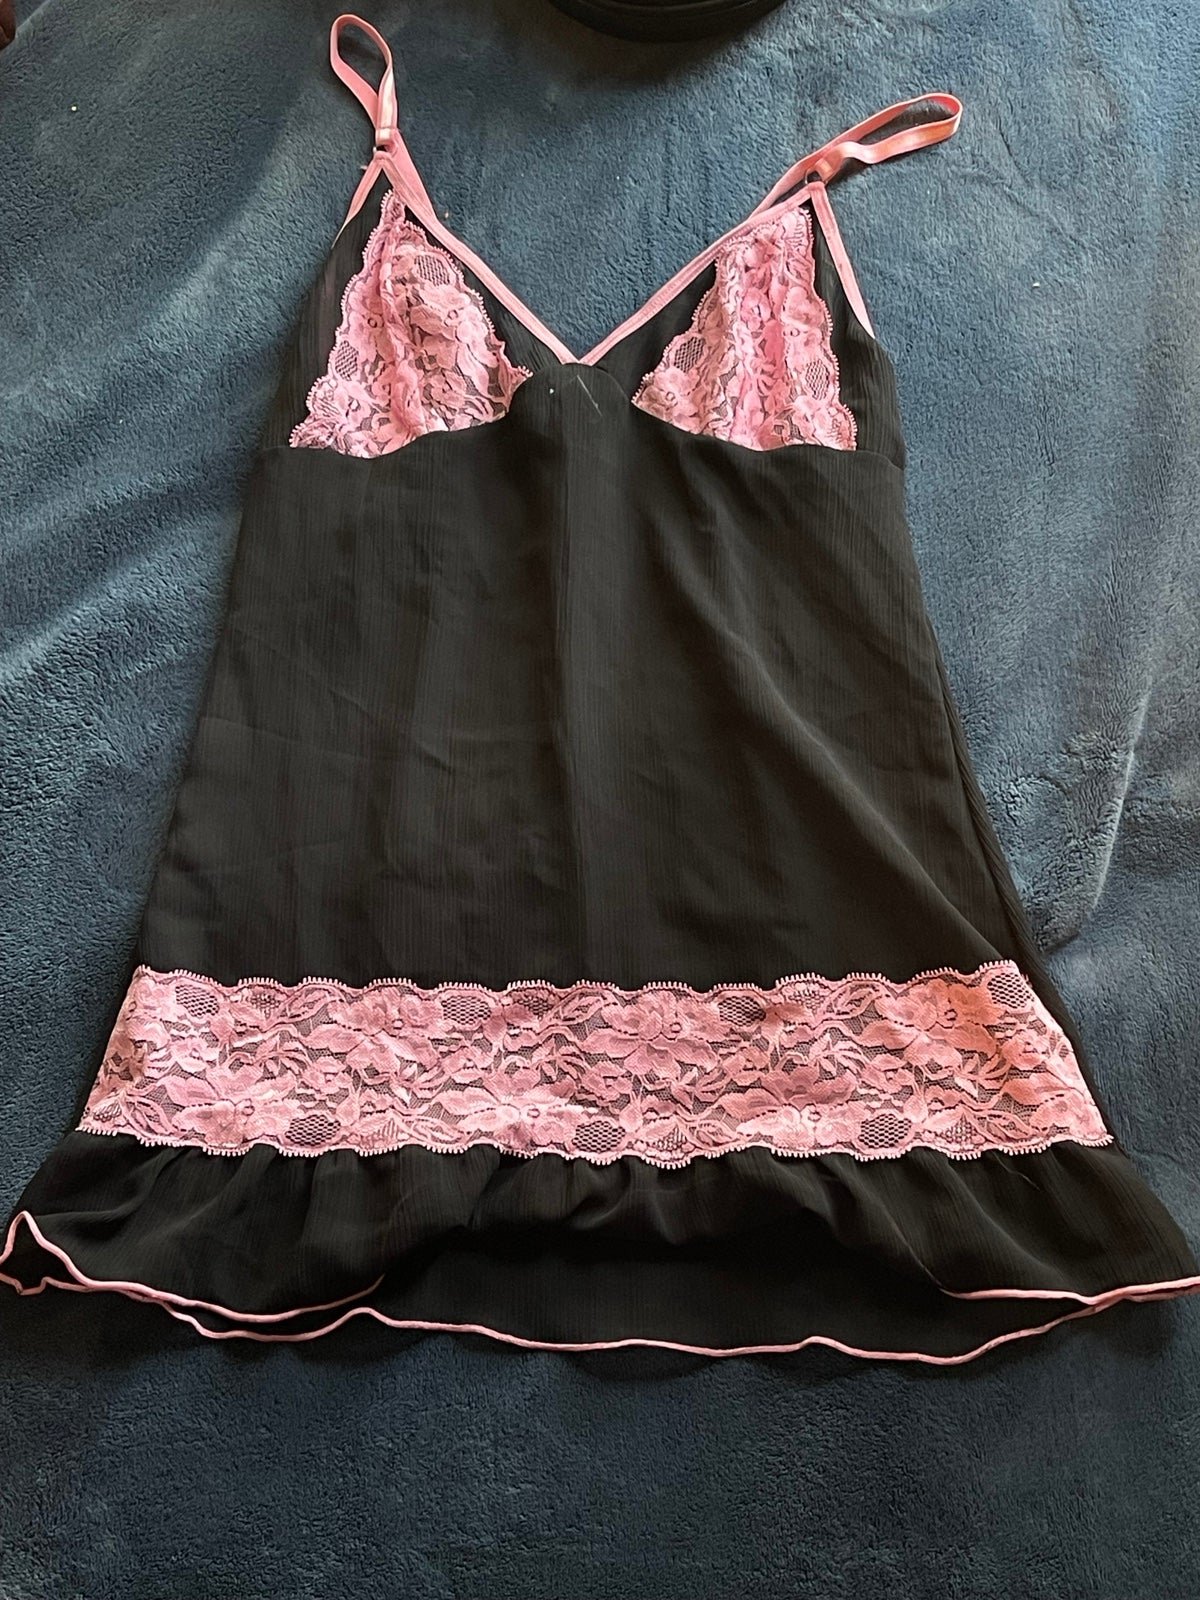 Gorgeous black and pink lace slip top KCGfQLRE1 Online Shop